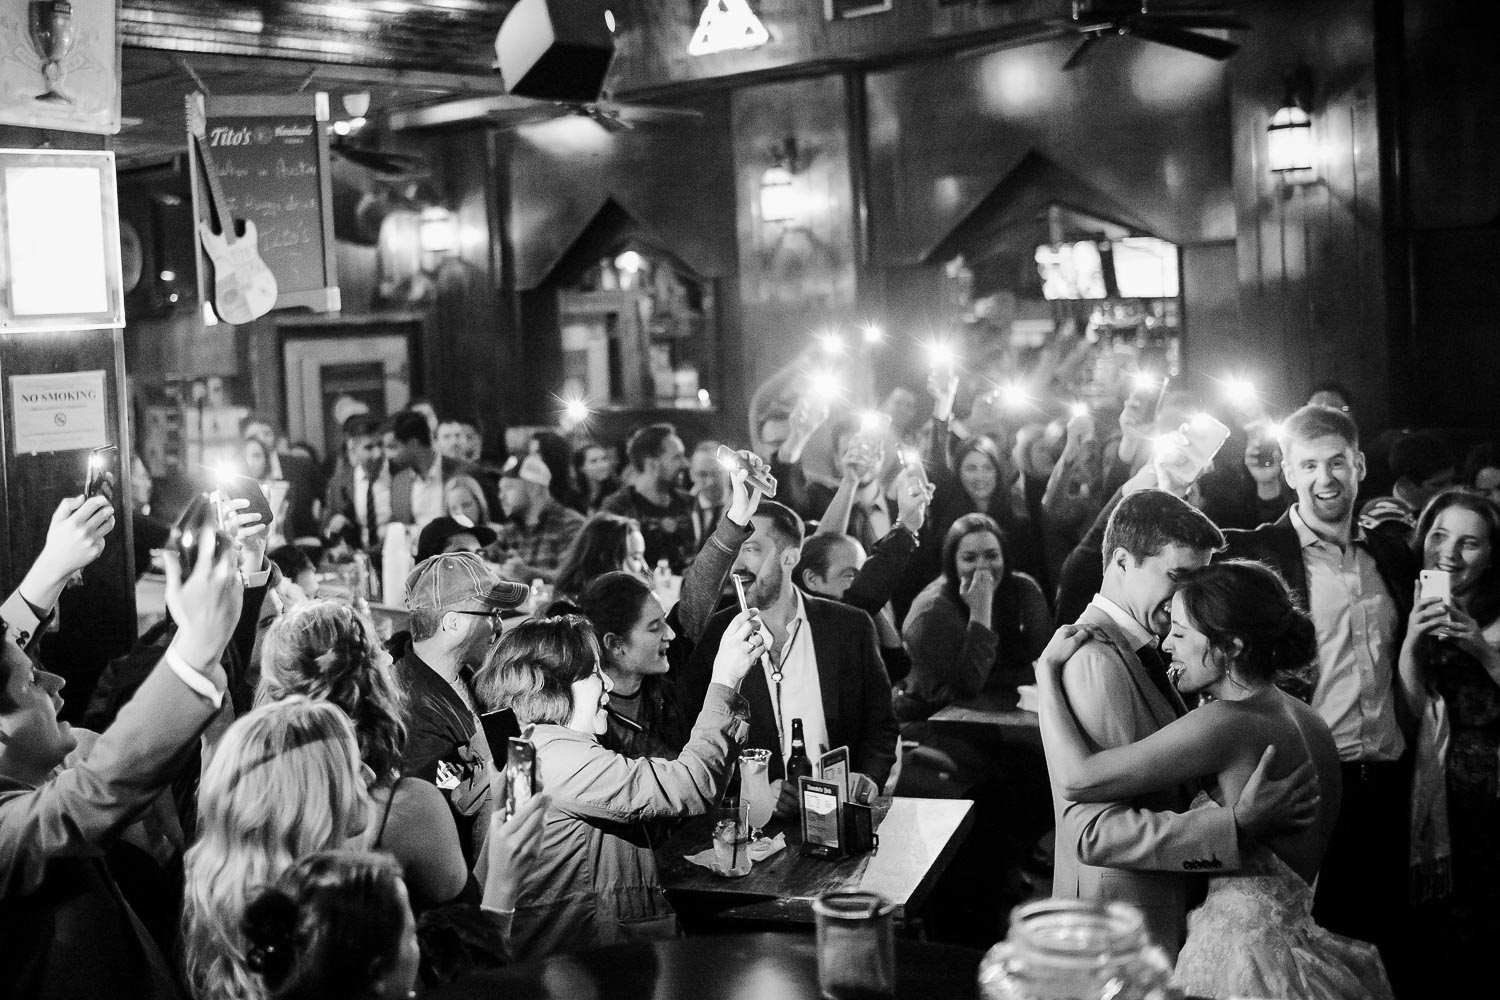 At Darwin's Piano Bar in downtown Austin, couple dance with guests raising their phones lighting the couple